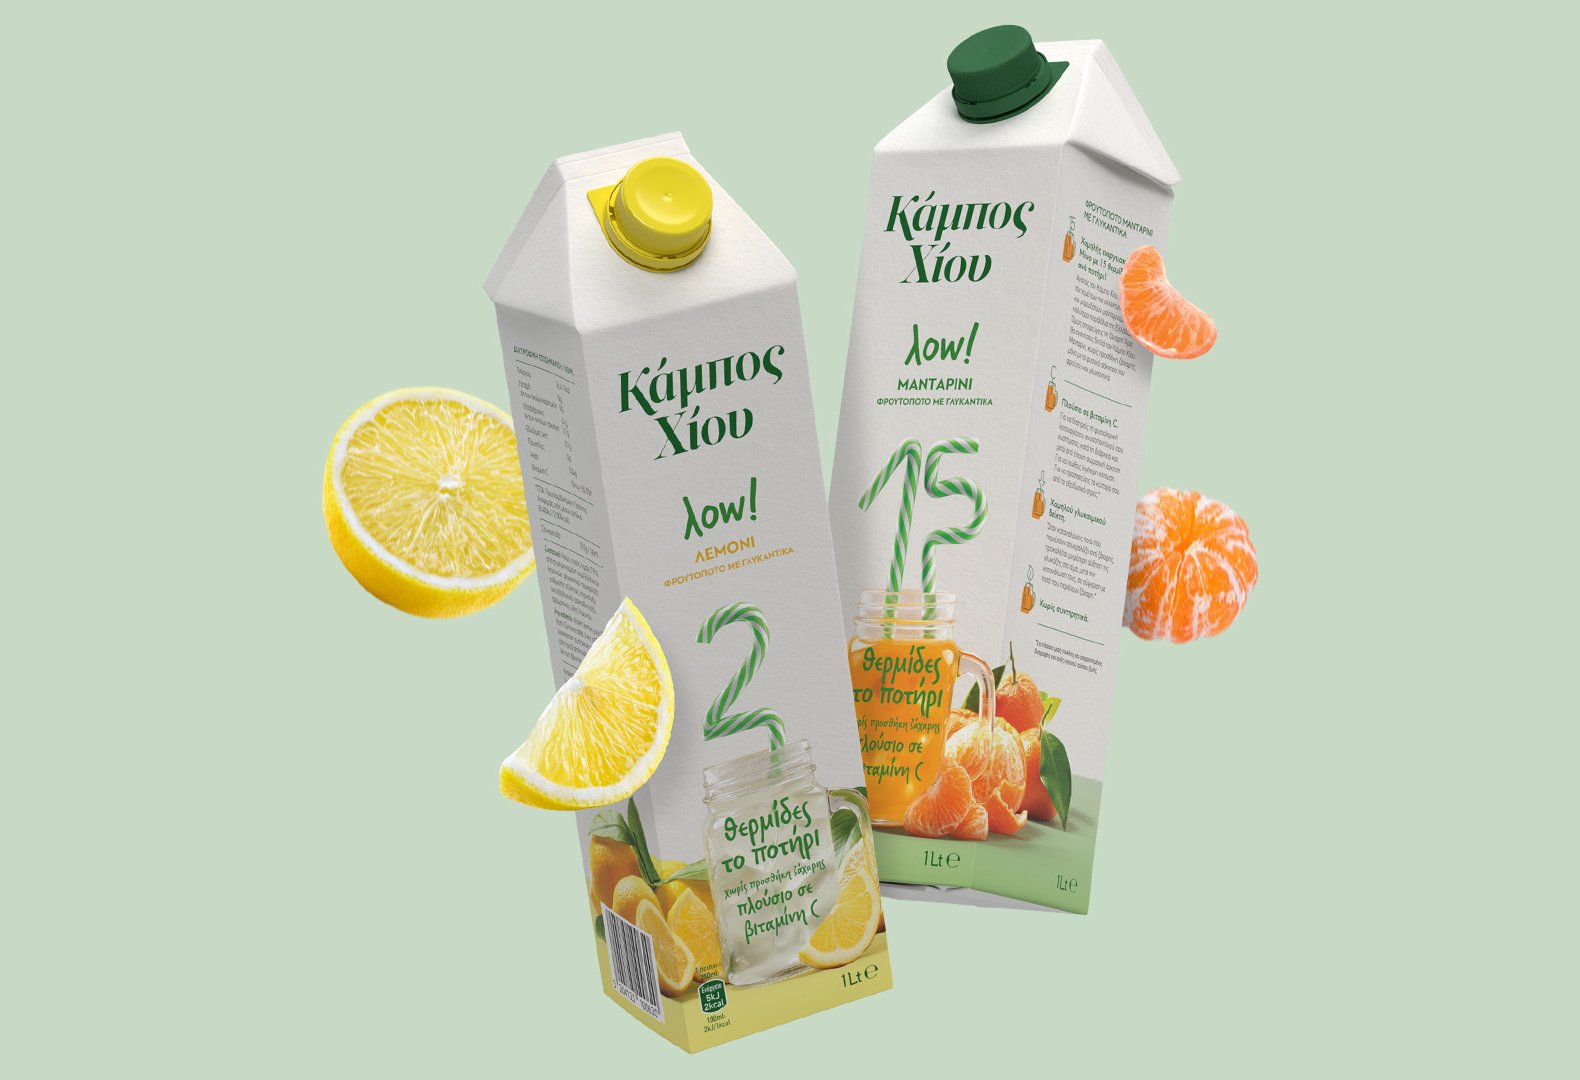 3d visual of Chios Gardens Low Mandarin and Lemon fruitdrinks packages surrounded by fresh citrus slices